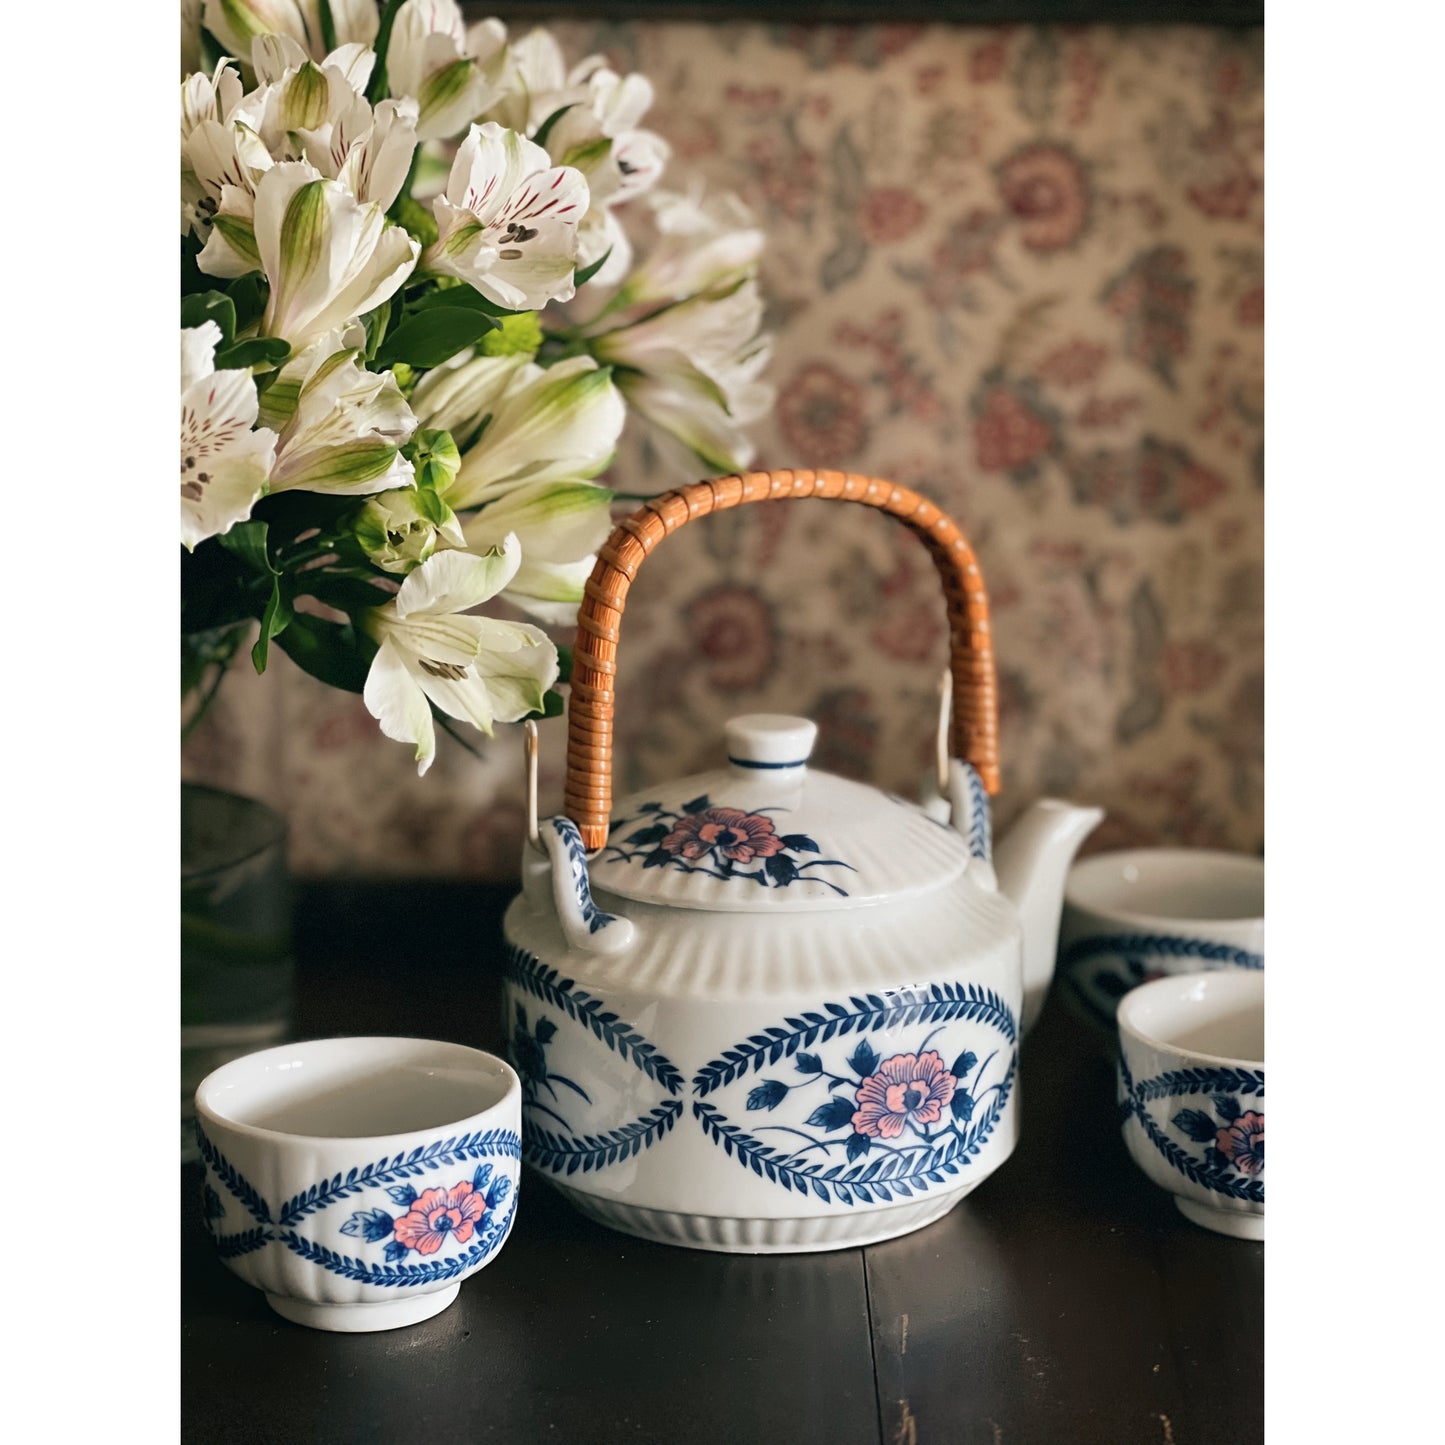 Vintage Porcelain Teapot with Rattan Handle and Set of 3 Matching Cups